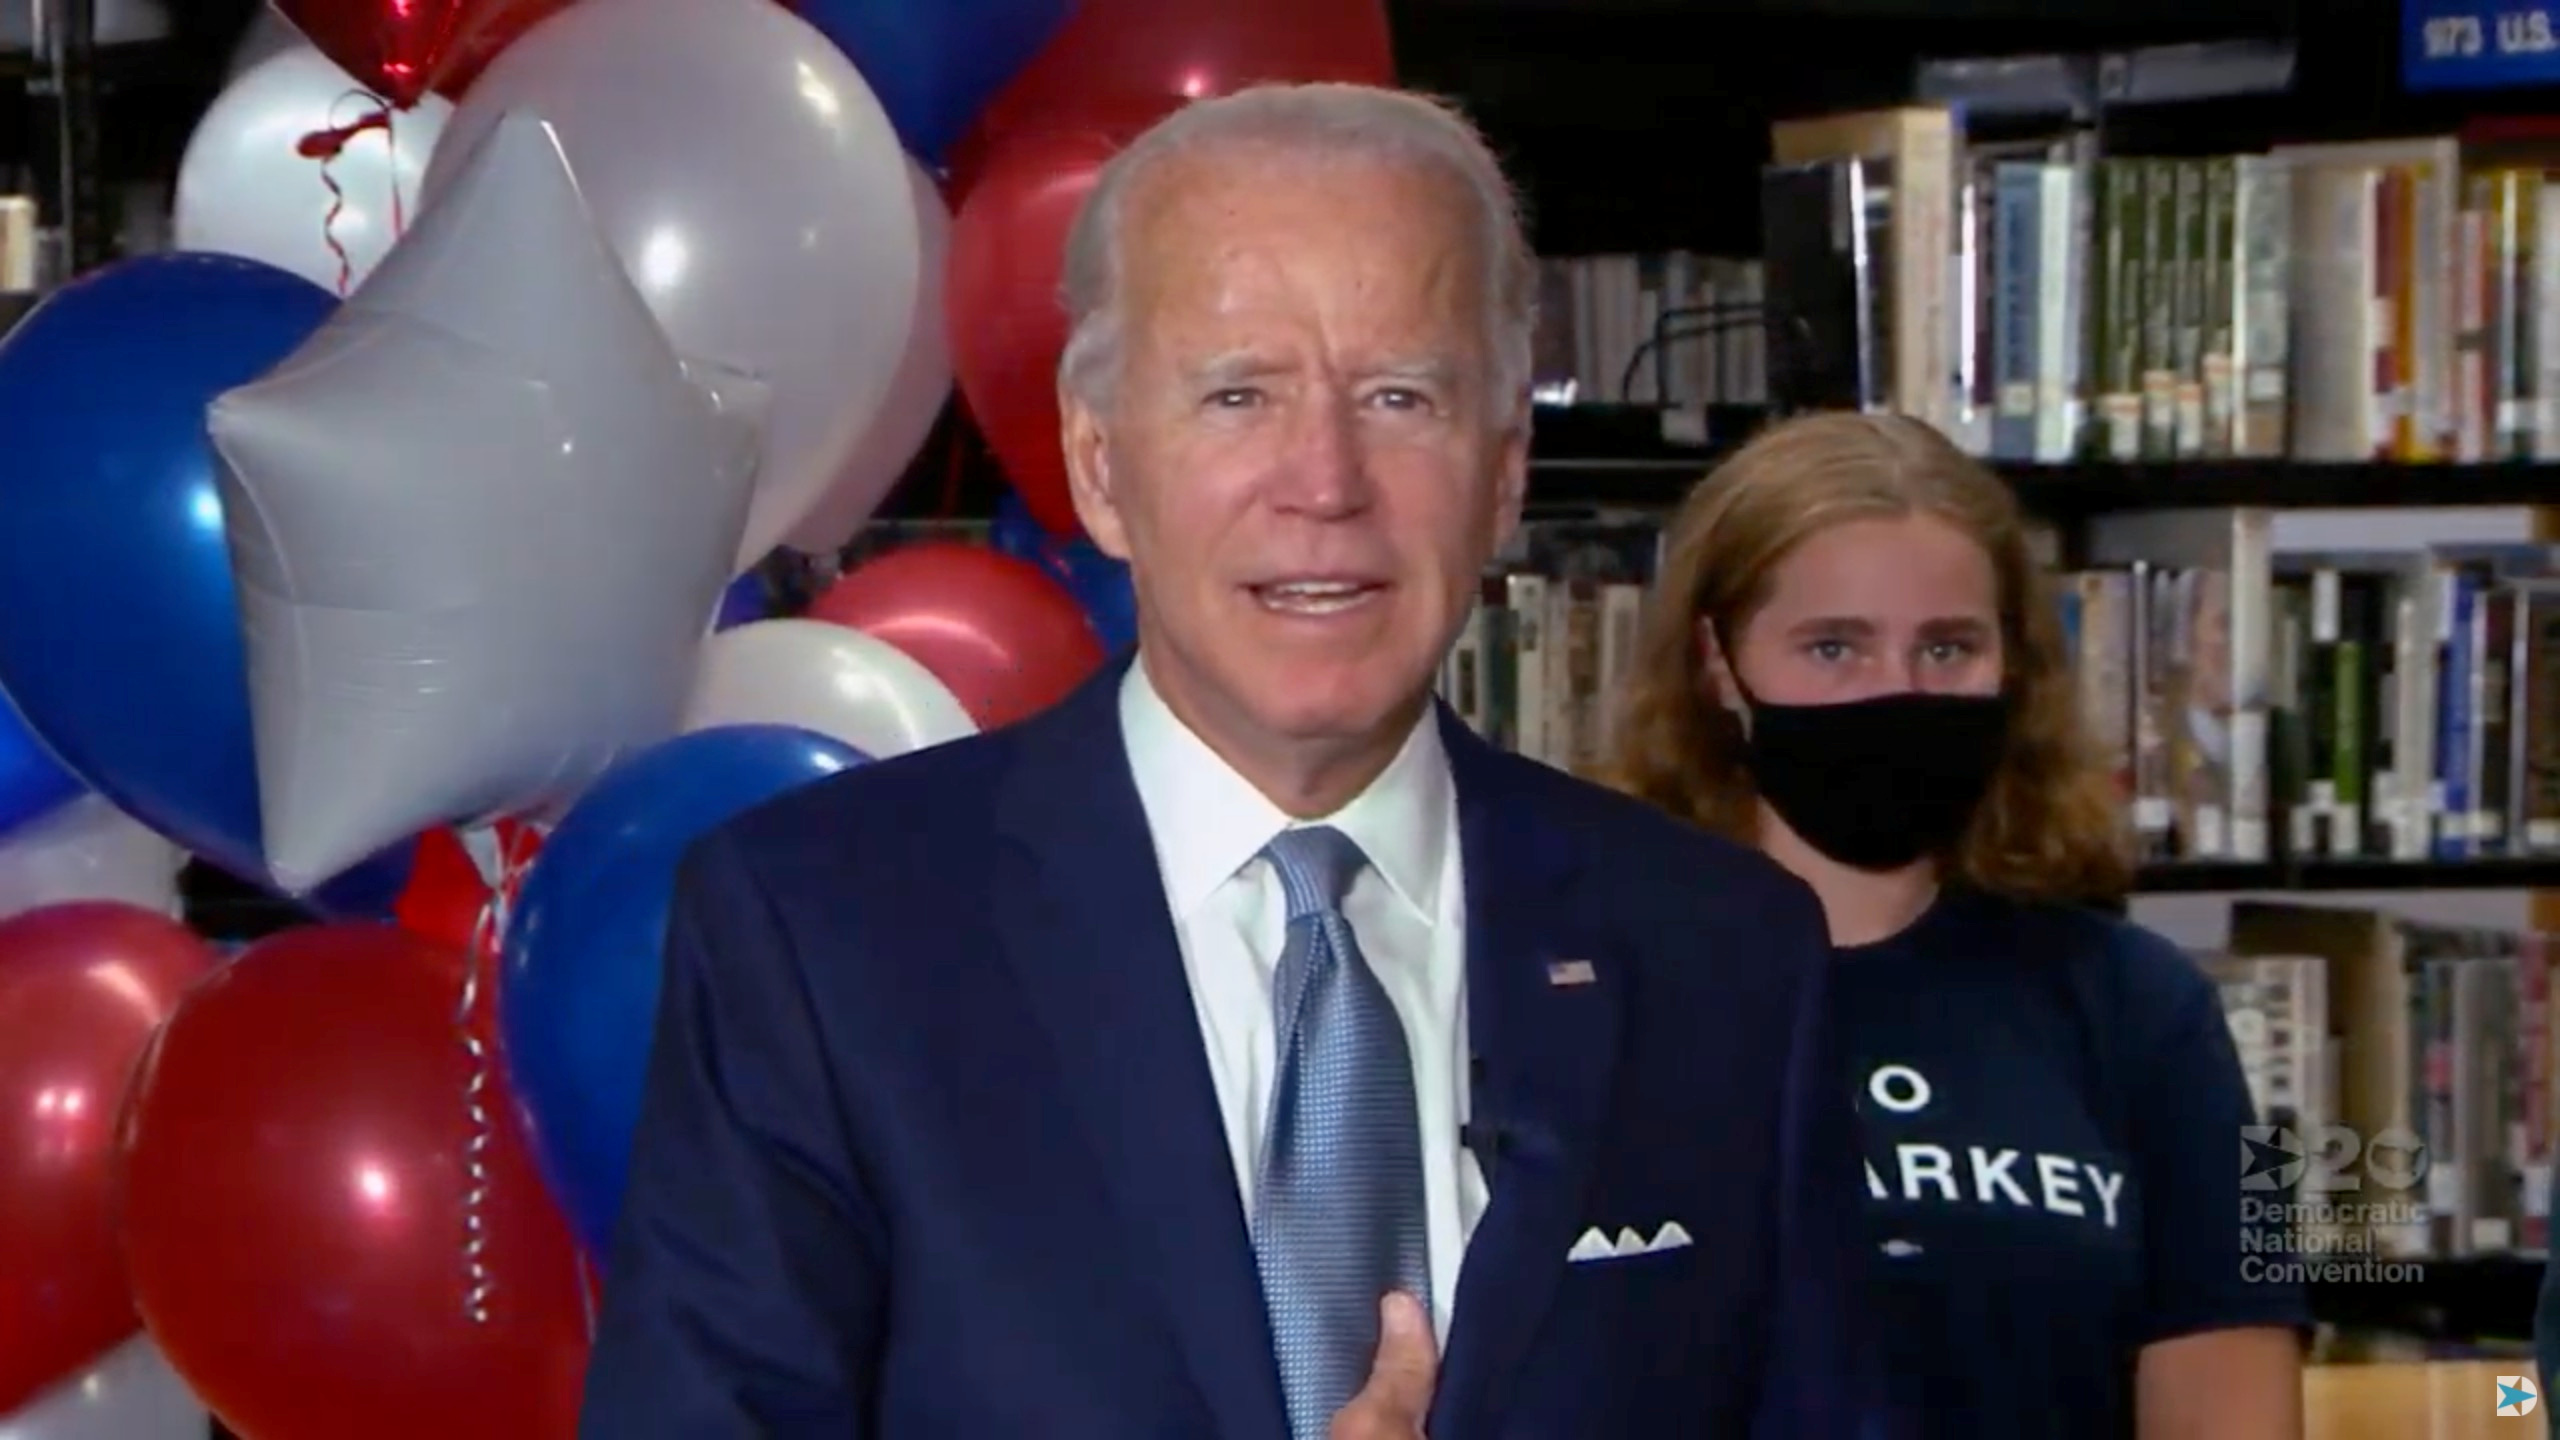 Joe Biden celebrates after being formally nominated as 2020 U.S. democratic presidential candidate in convention roll call during the virtual 2020 Democratic National Convention as participants from across the country are hosted over video links from the originally planned site of the convention in Milwaukee, Wisconsin, U.S. August 18, 2020. 2020 Democratic National Convention/Pool via REUTERS